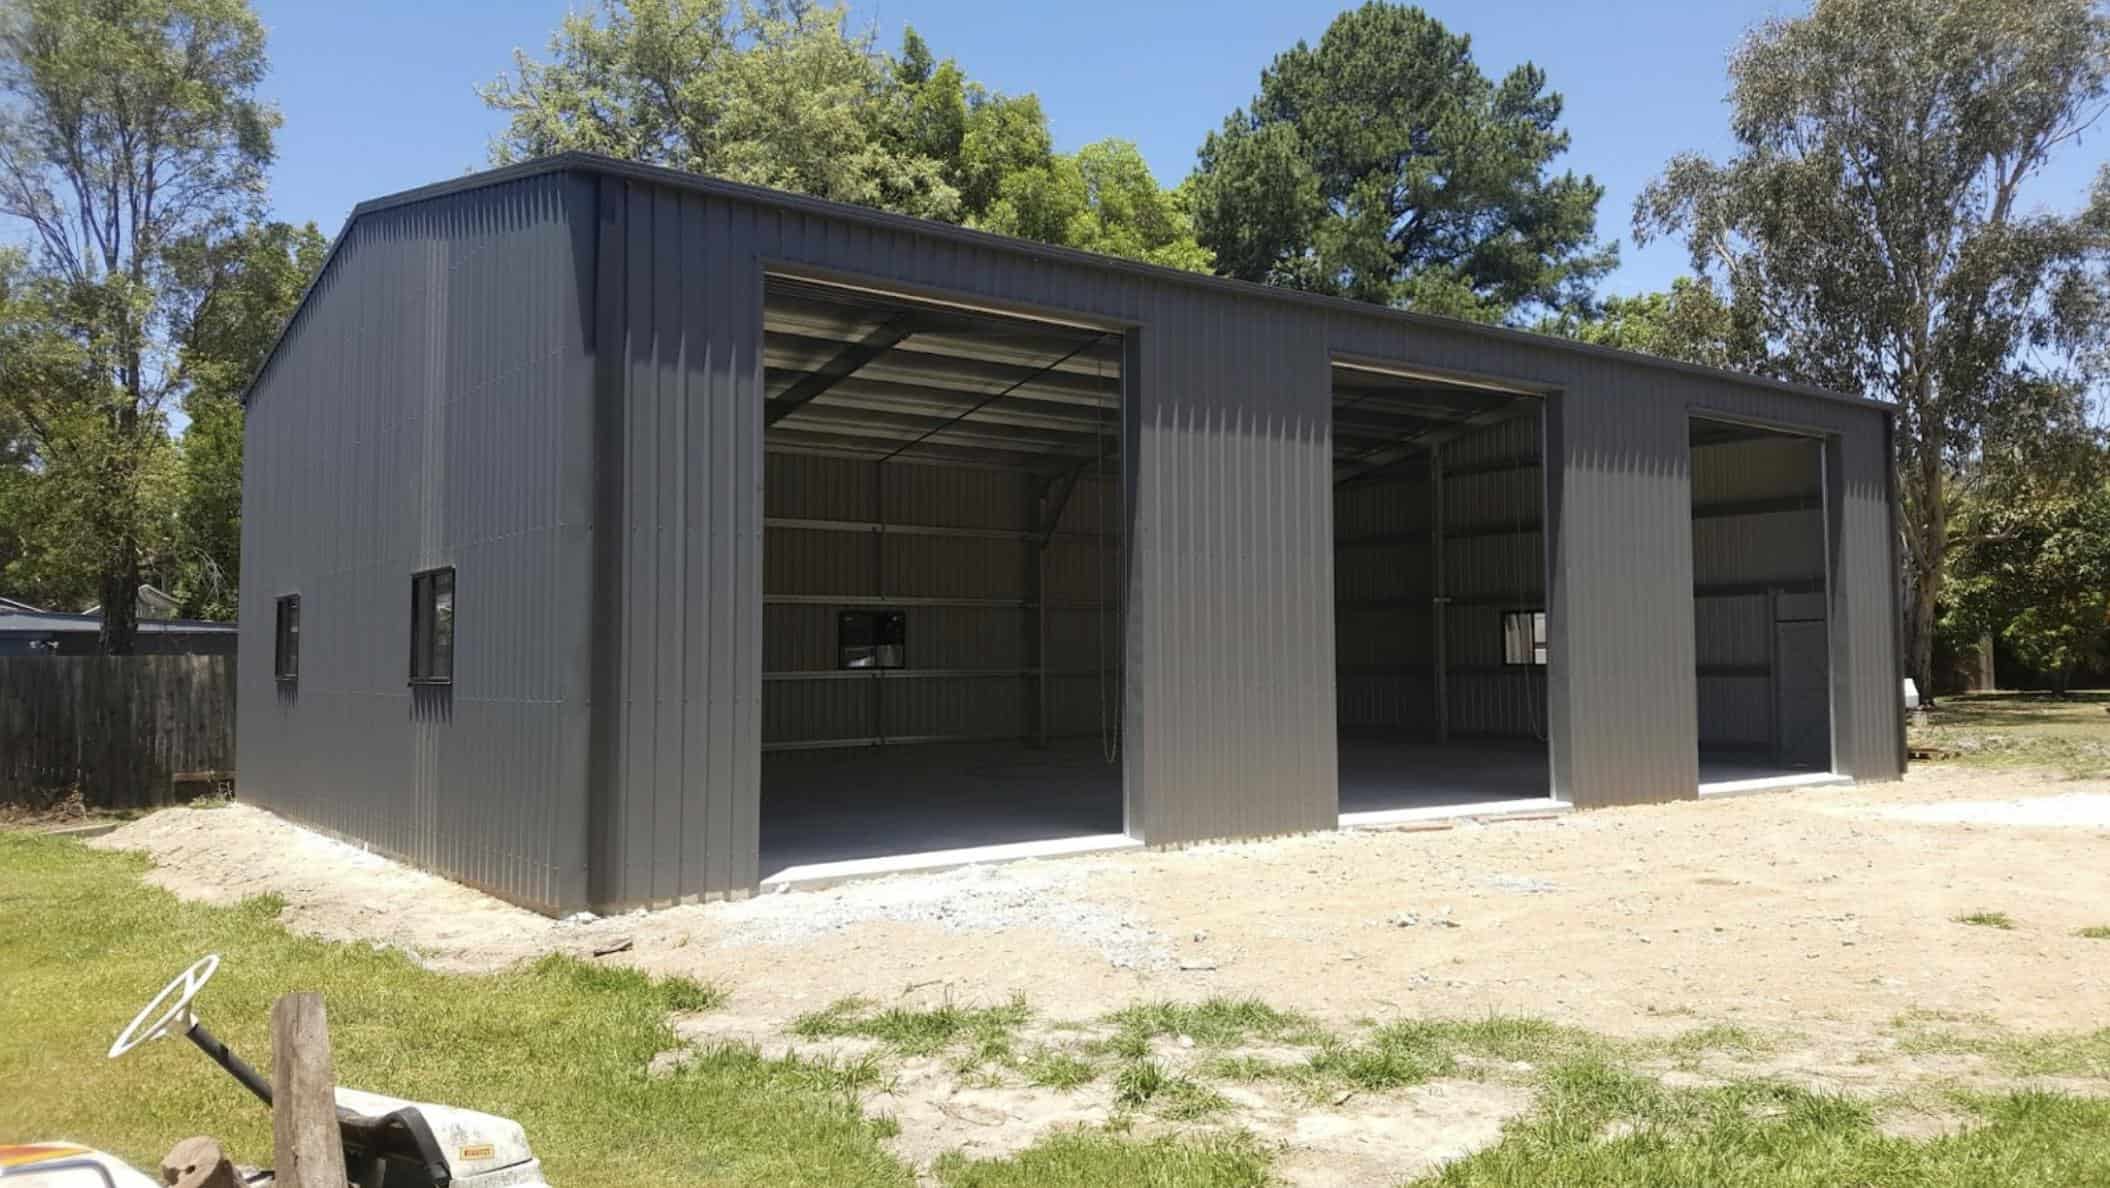 A large metal shed with three open roller doors